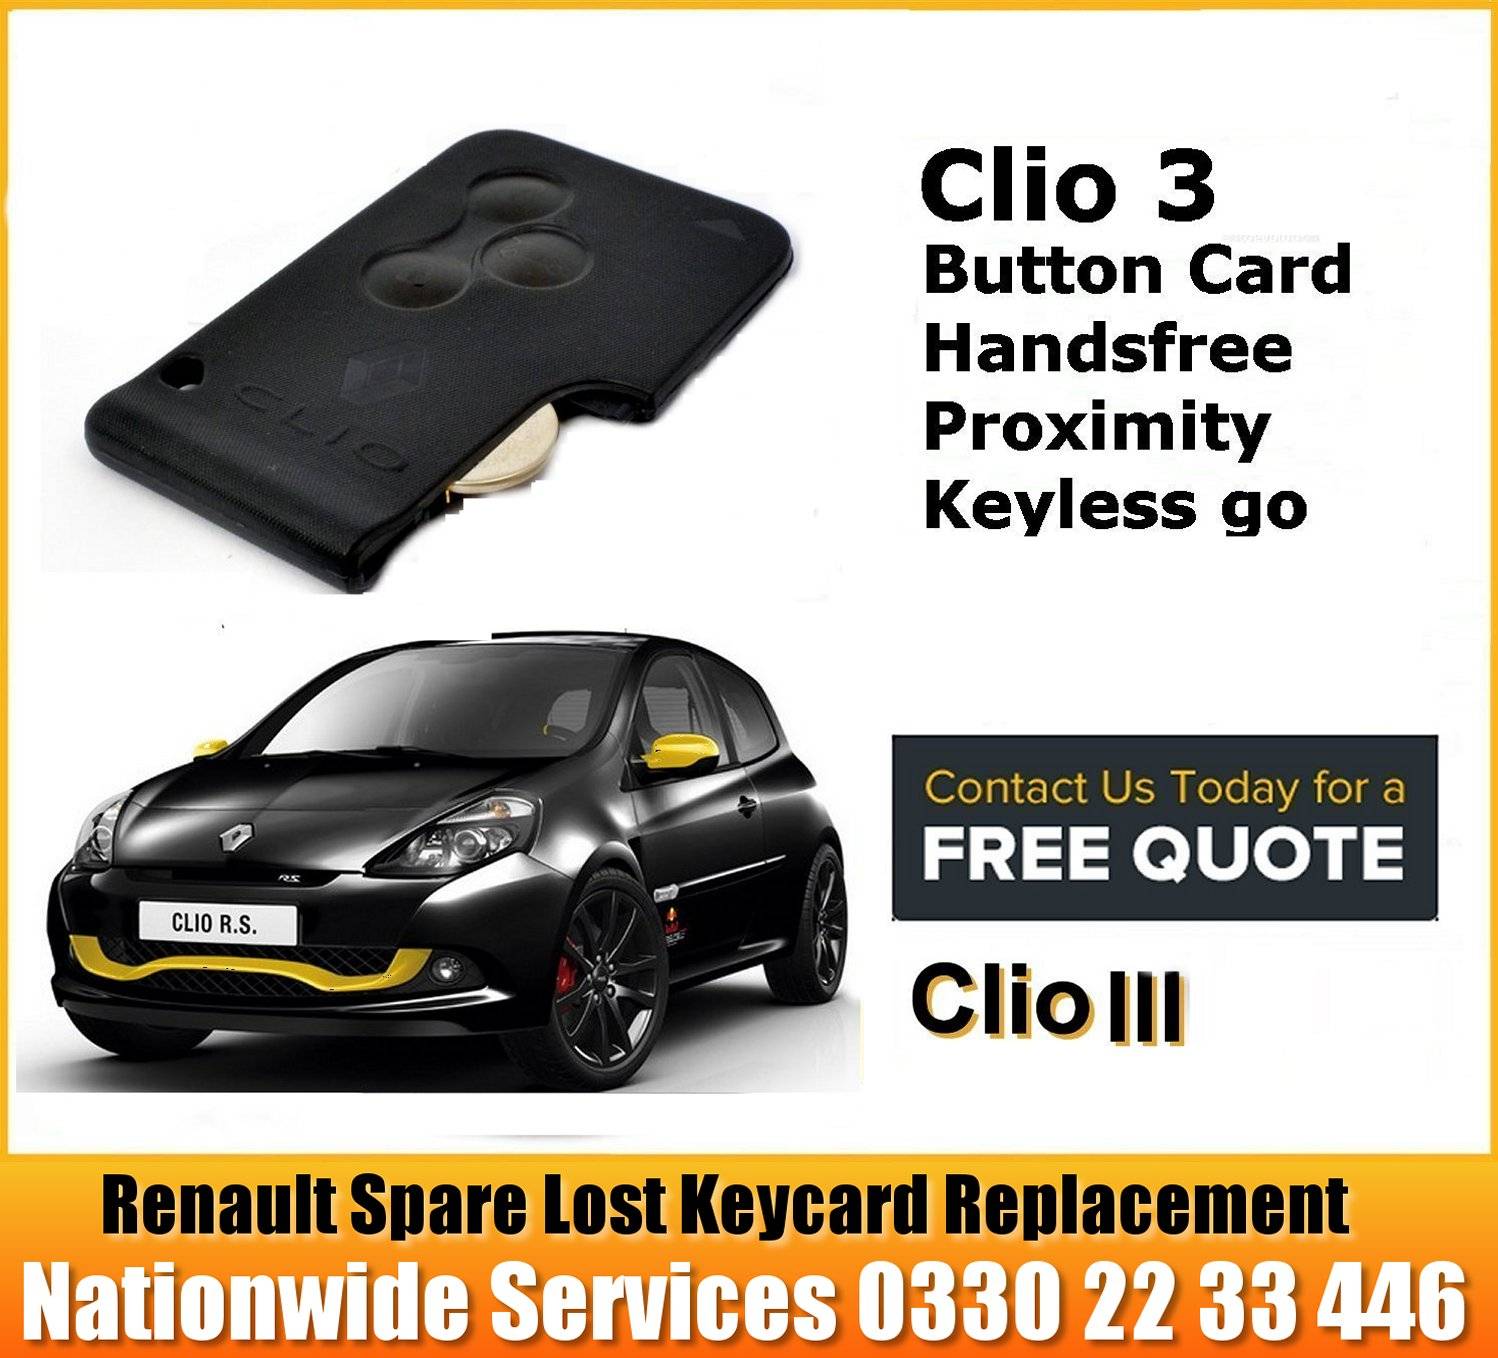 Renault Clio programming repair services manchester replacement keycards